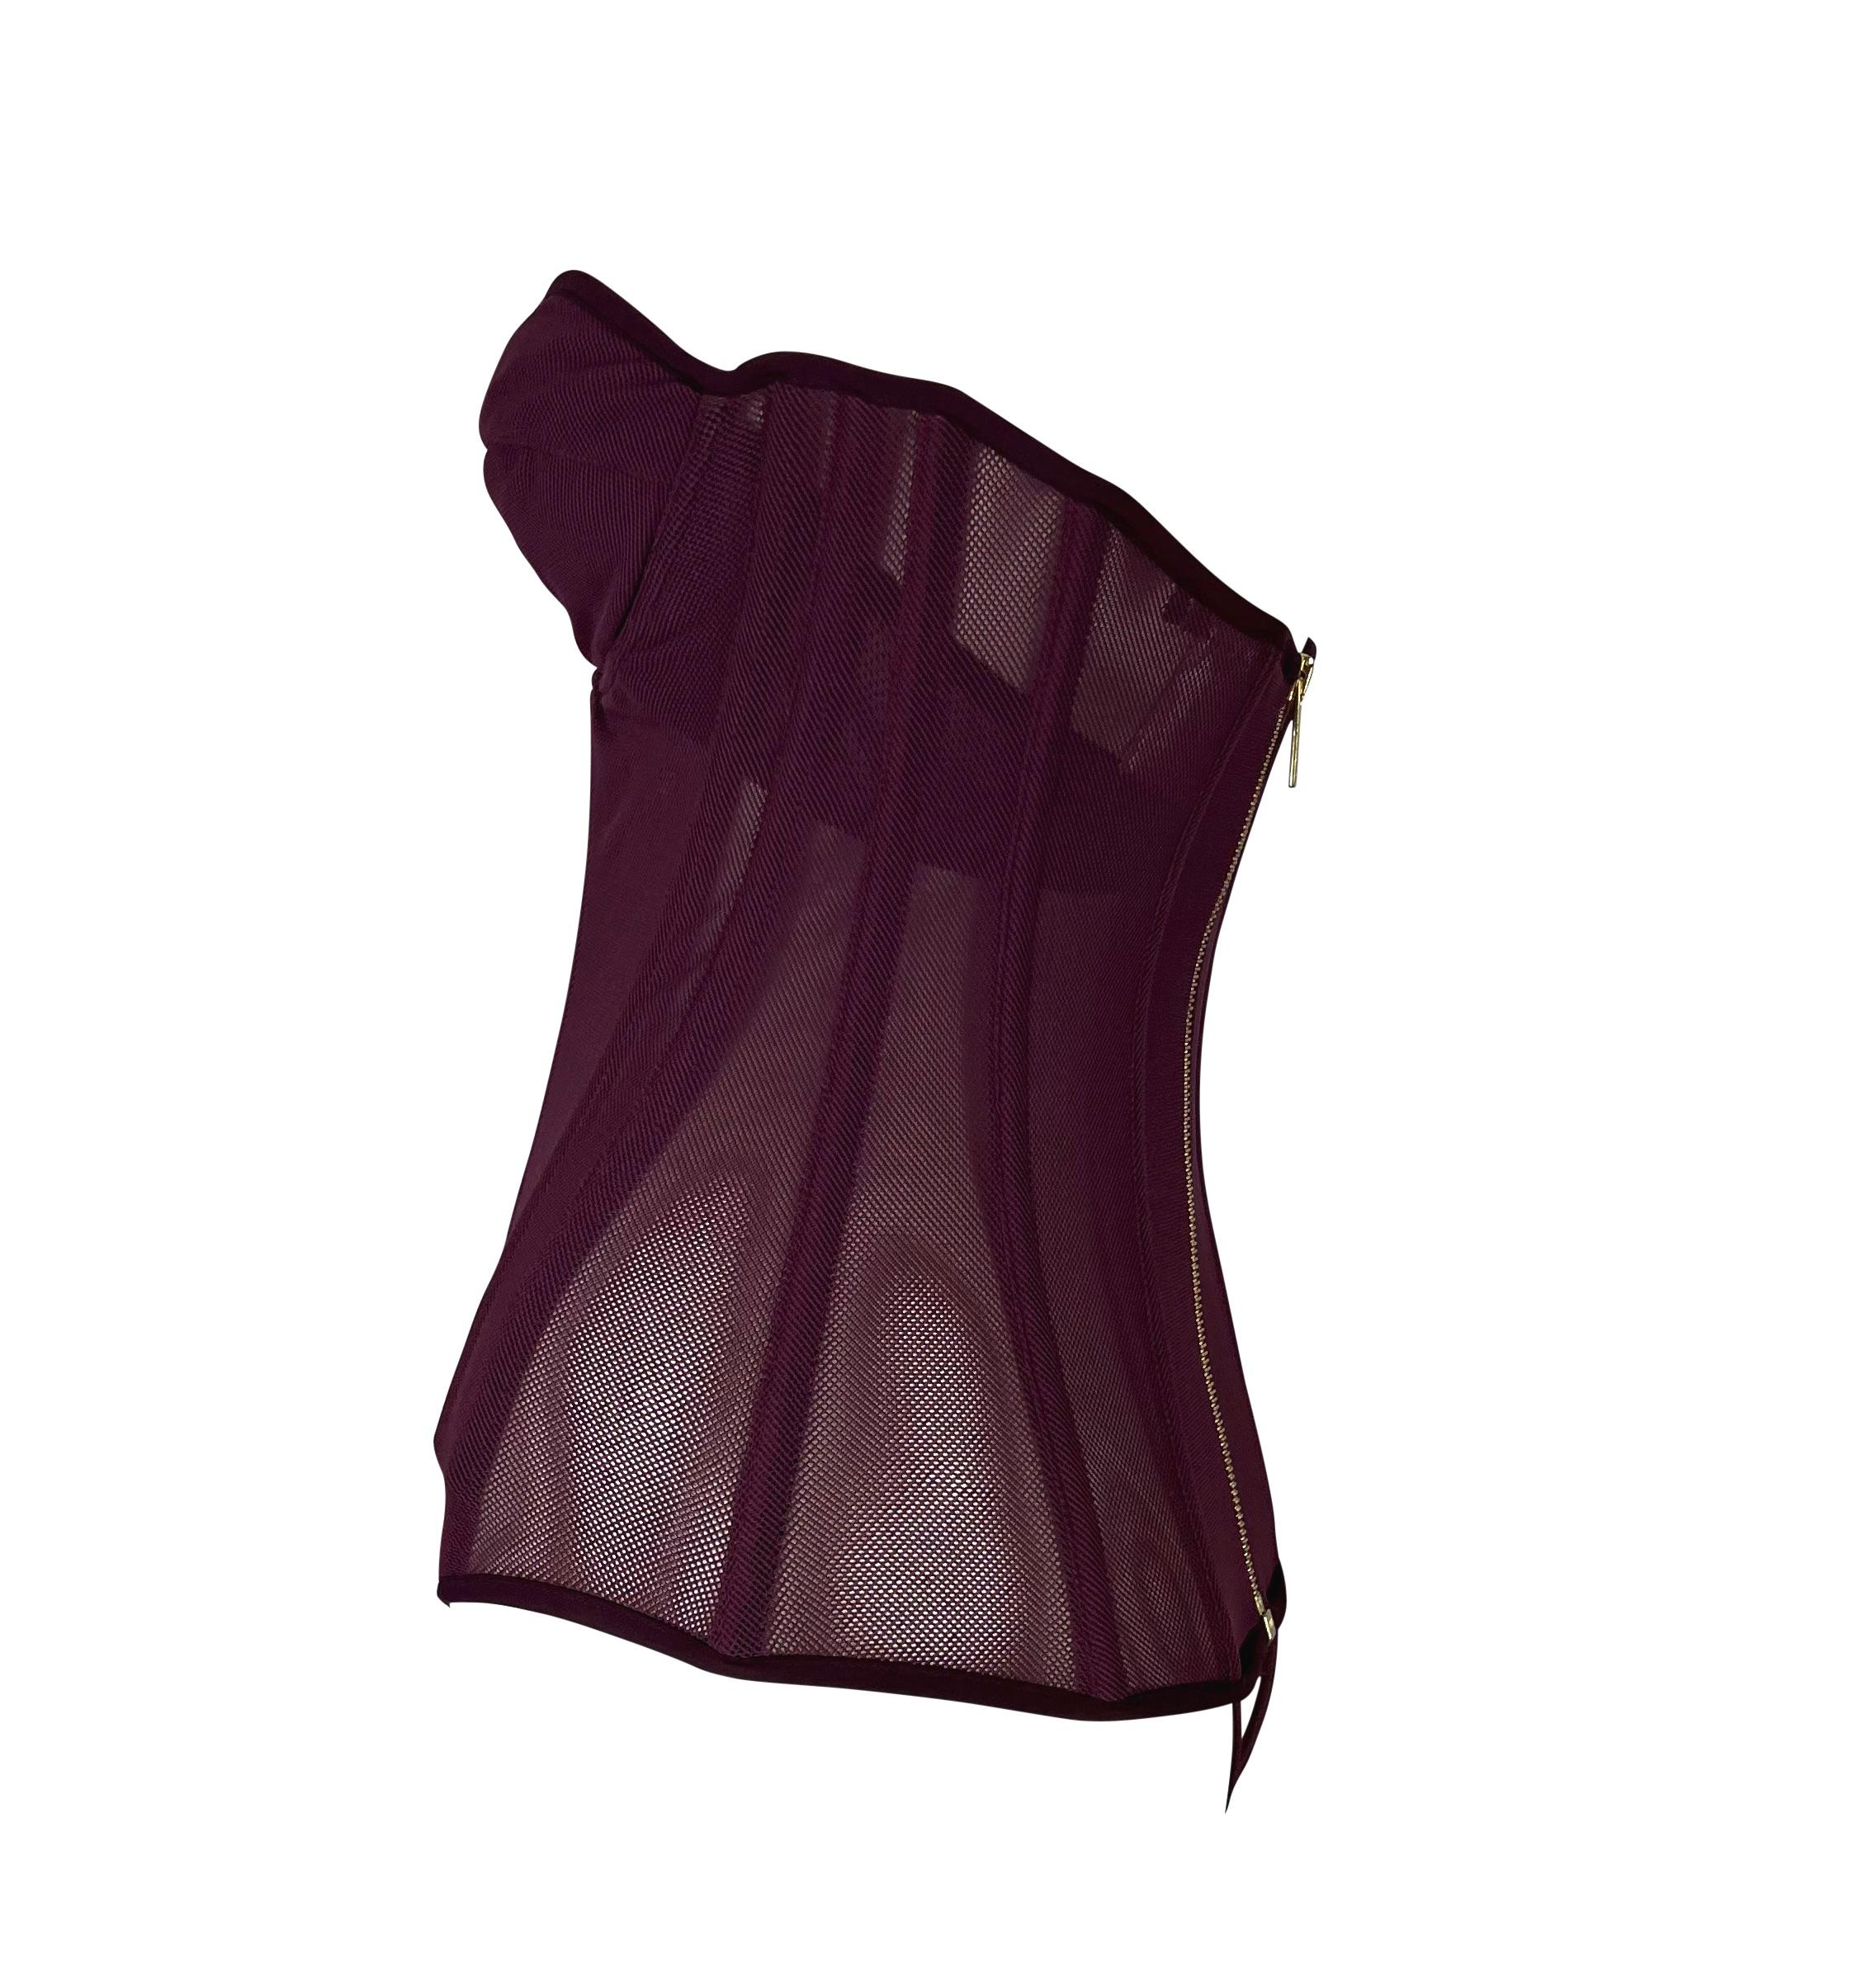 TheRealList presents: a burgundy mesh Roberto Cavalli body suit. From 2003, this fabulous strapless body suit is constructed of see-through mesh and outfitted with boning to create a corsetted form-fitting look. This top is made complete with an